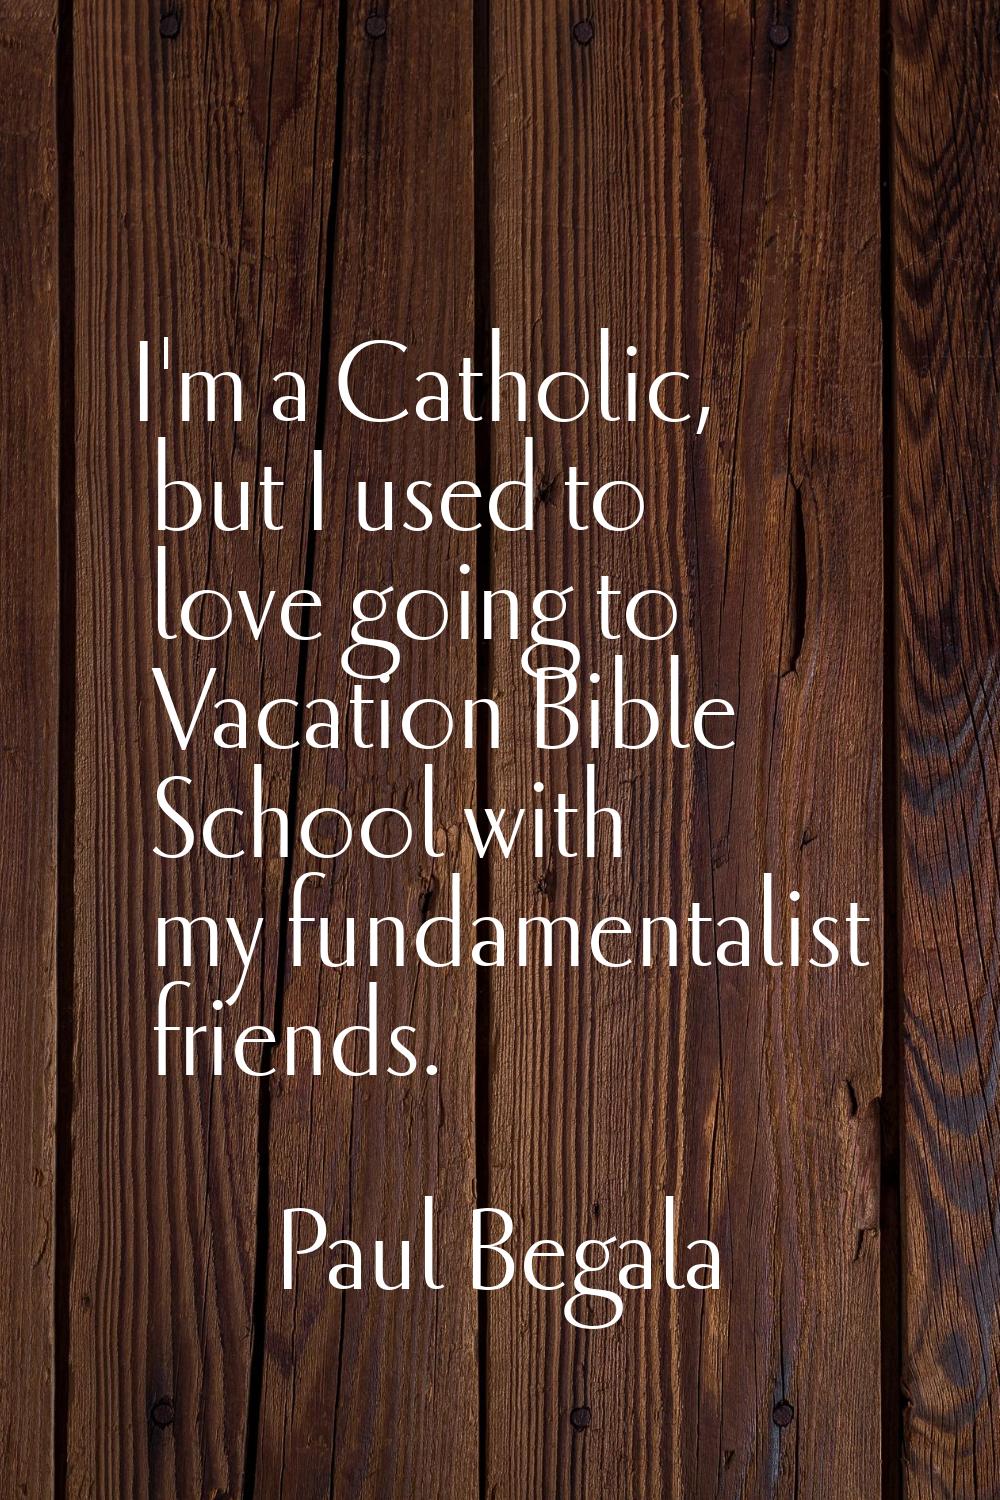 I'm a Catholic, but I used to love going to Vacation Bible School with my fundamentalist friends.